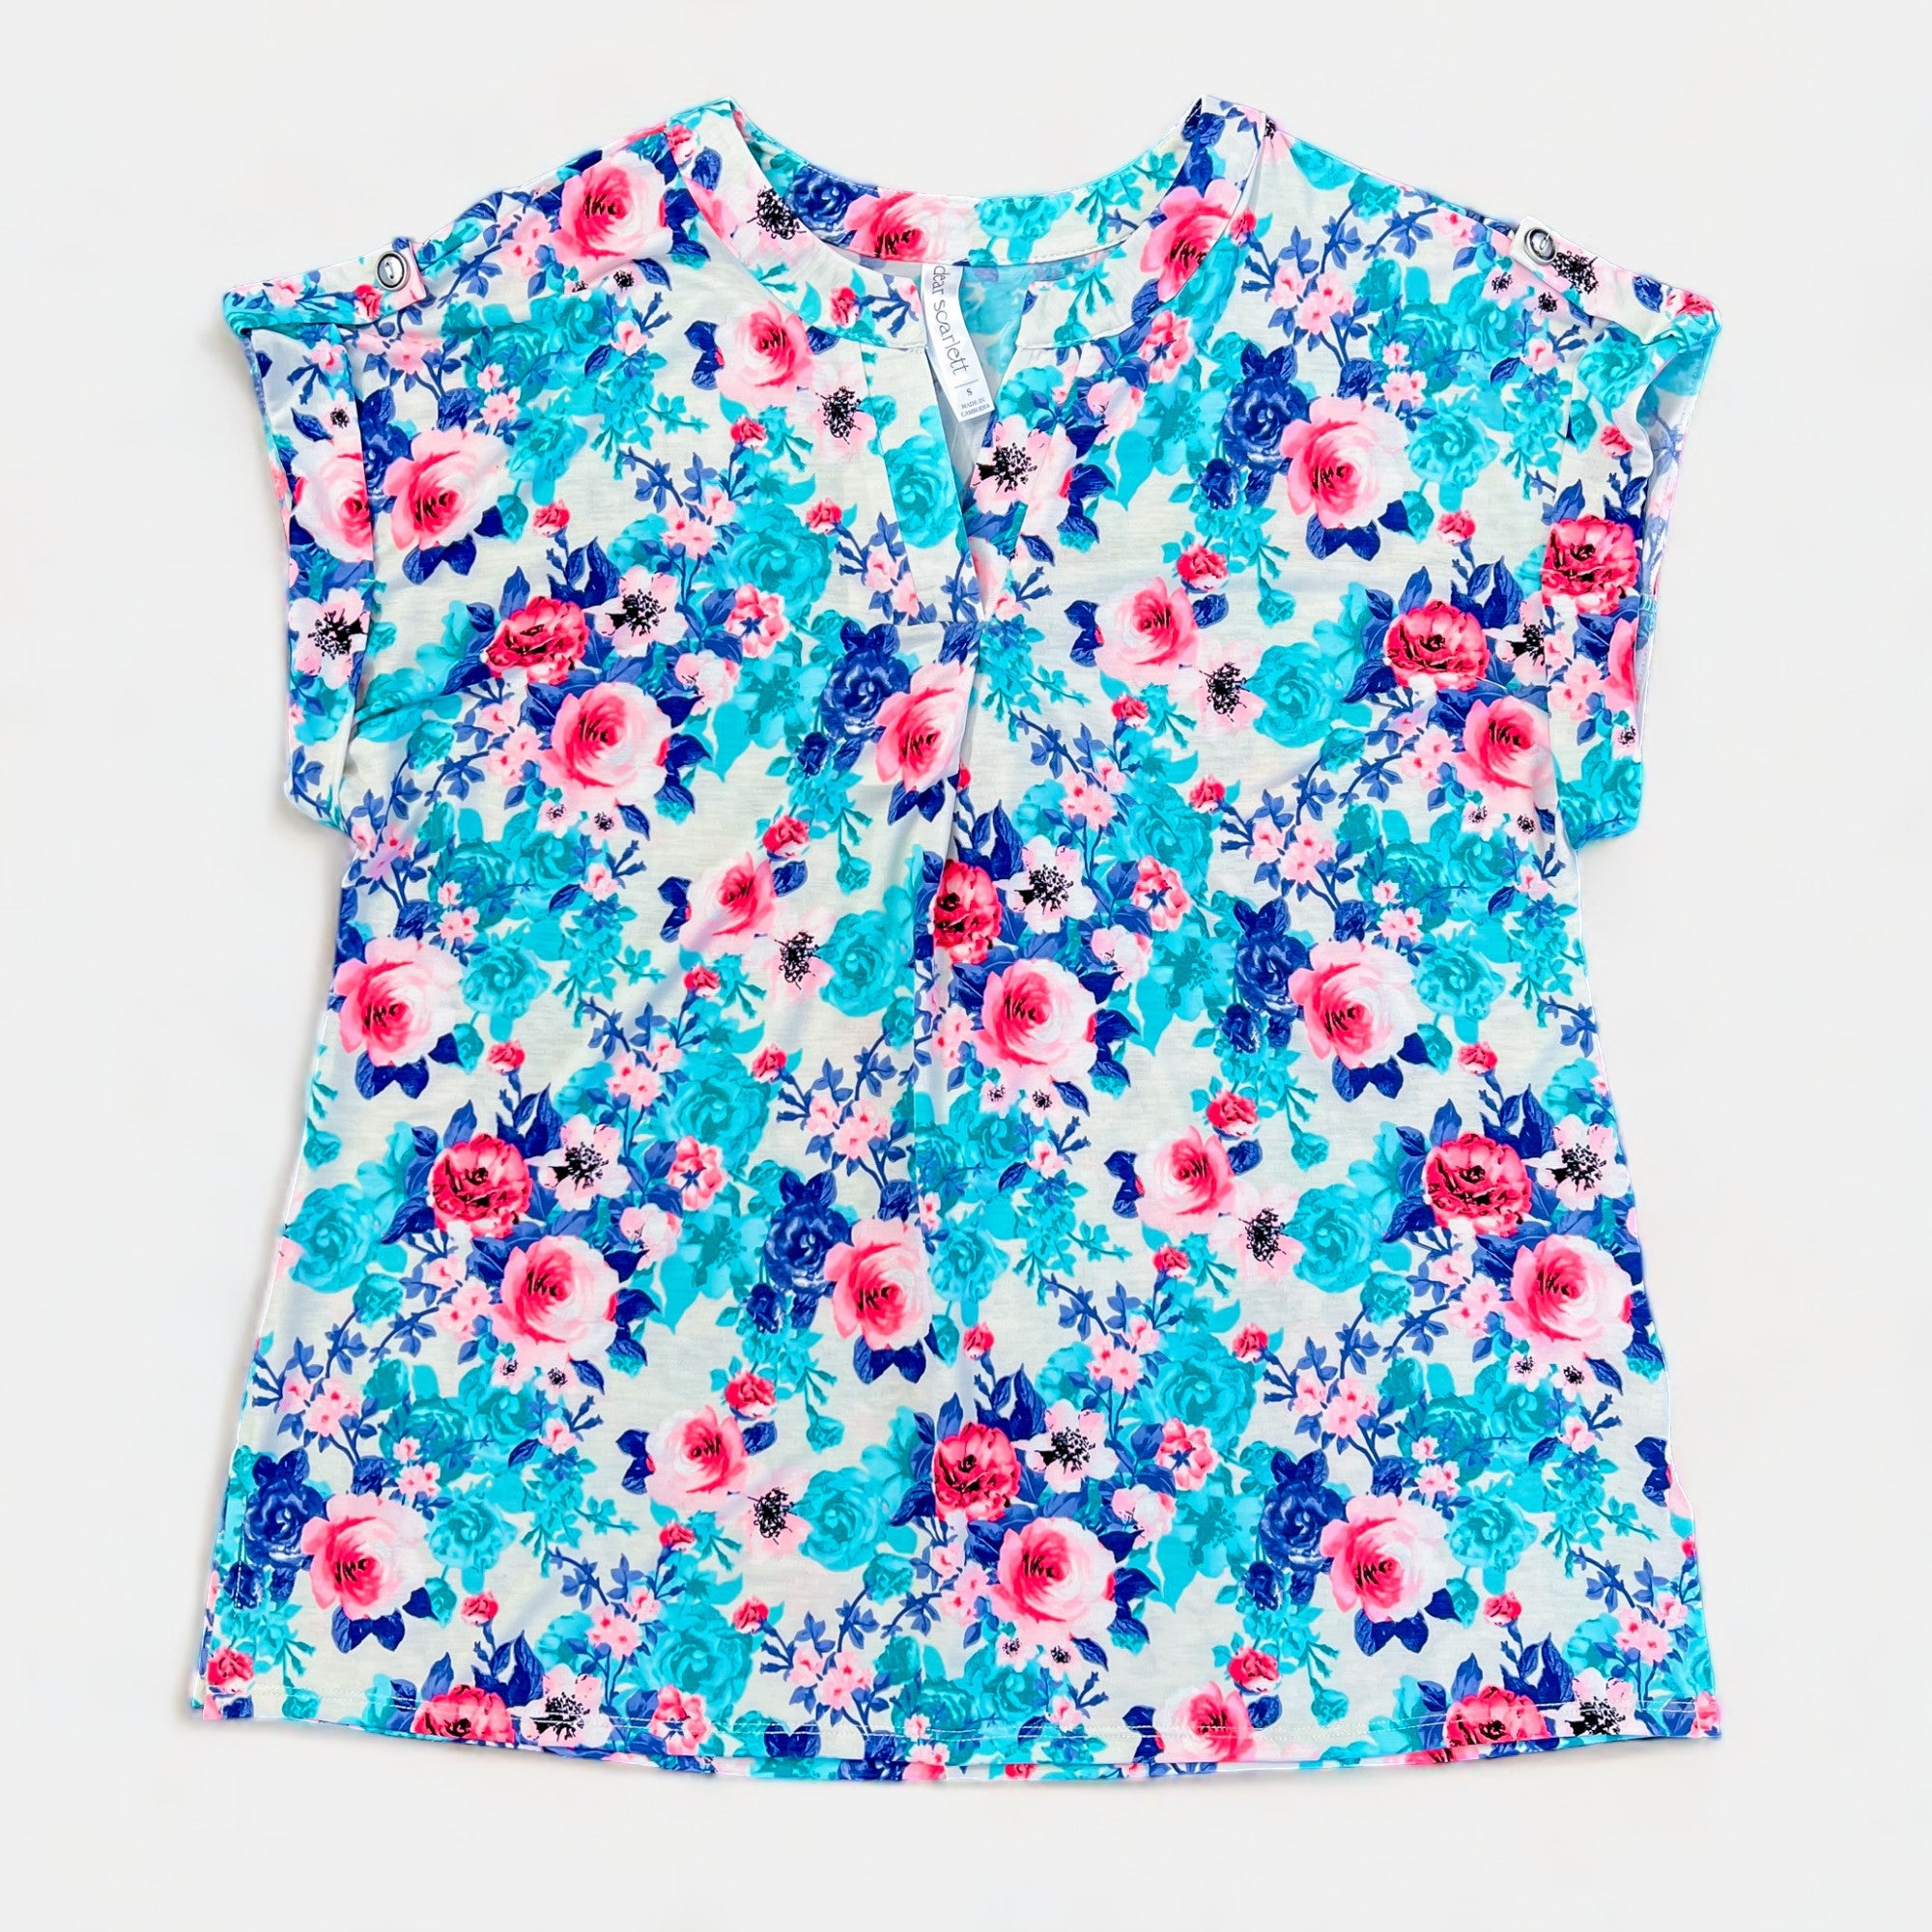 Multi Floral Lizzy Short Sleeve Top